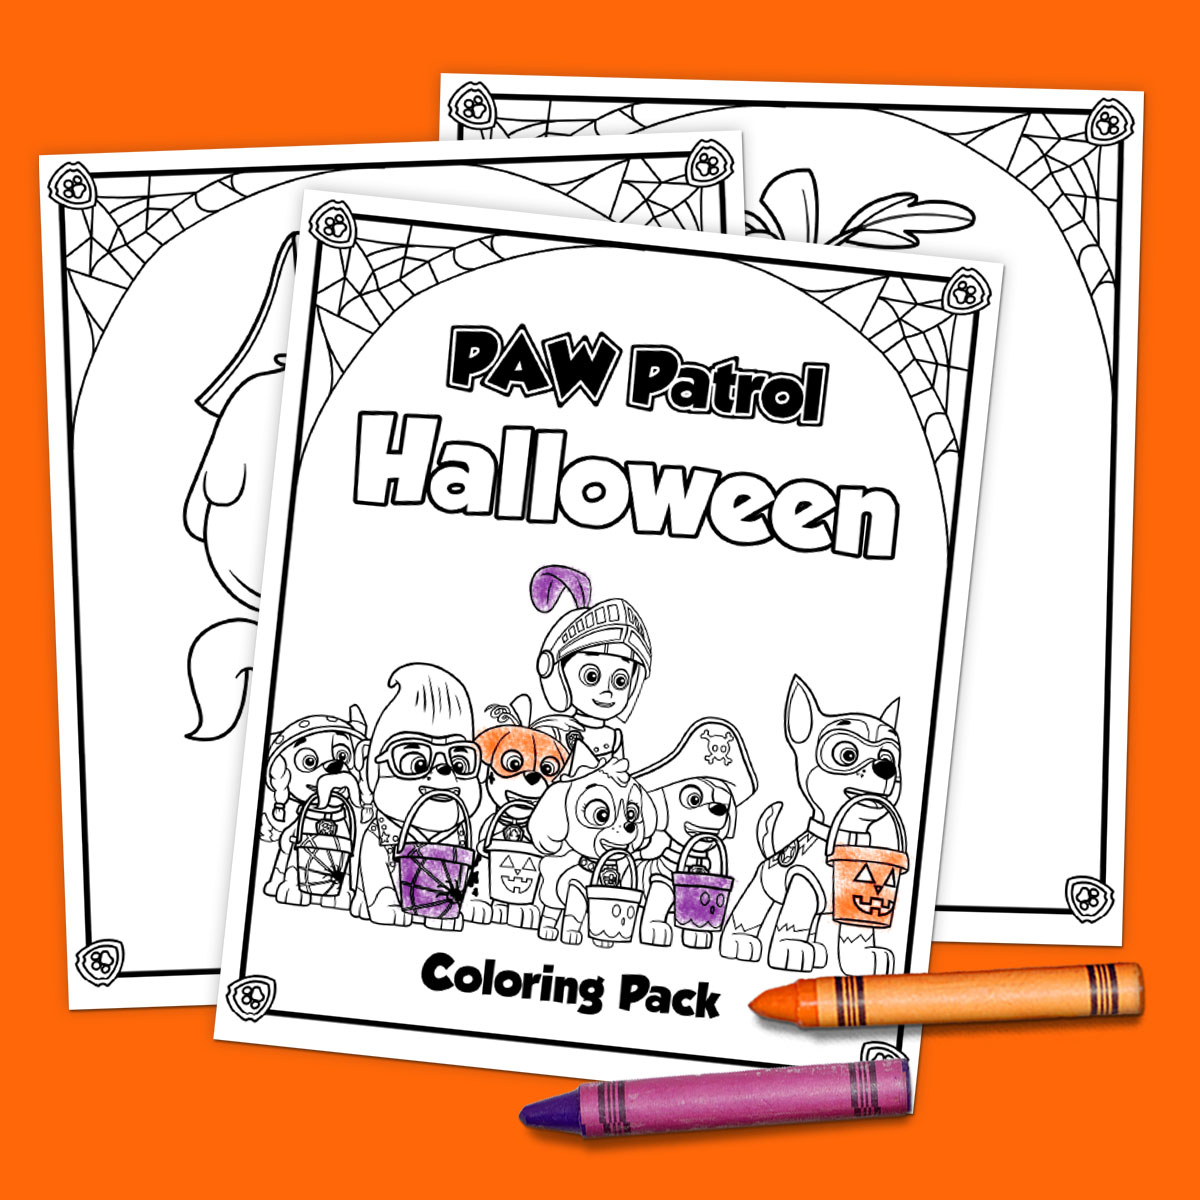 PAW Halloween Coloring Pack